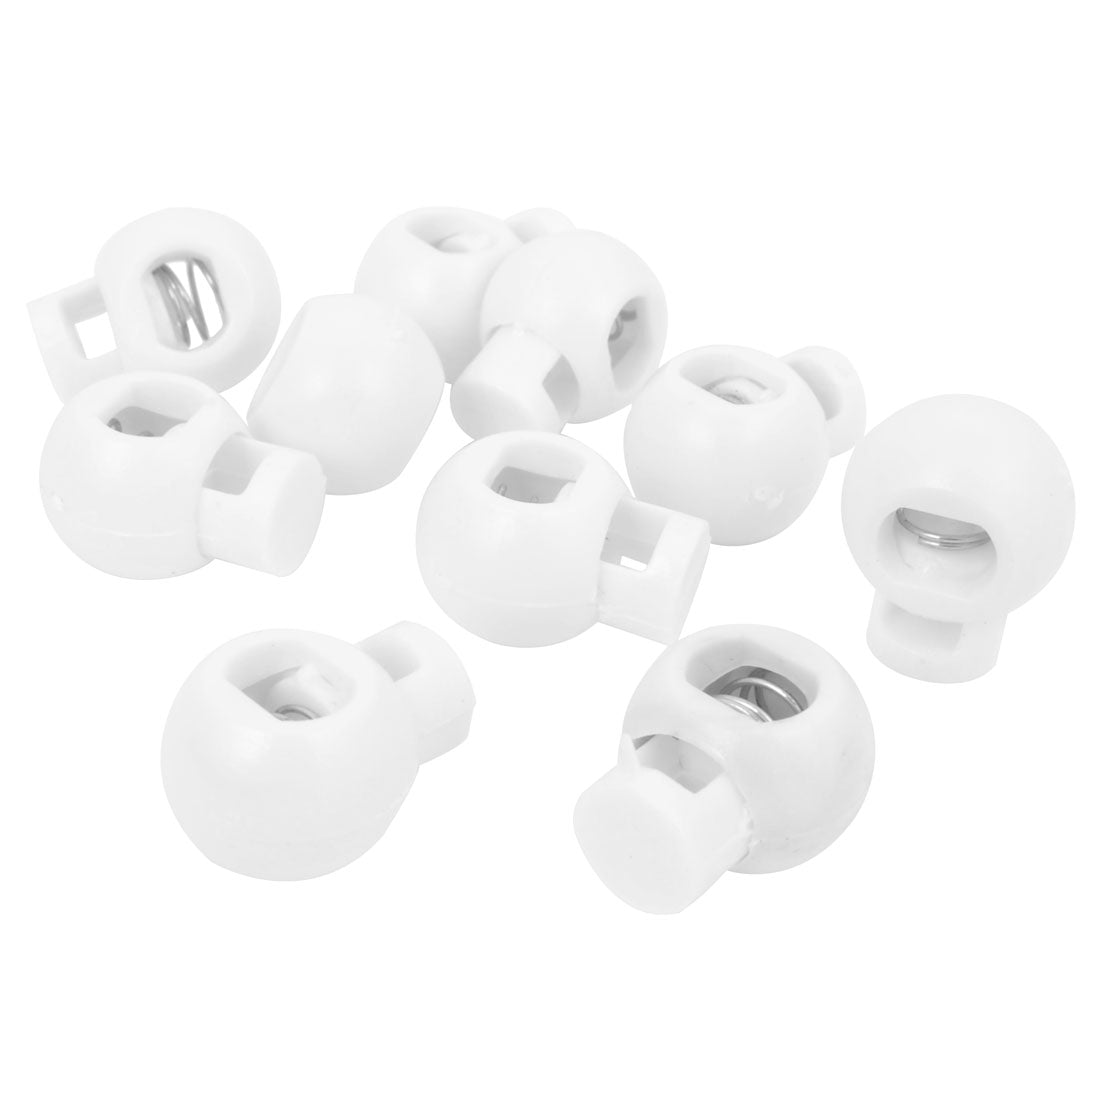 uxcell Uxcell White 6mm x 5mm Single Hole Round Head Spring Cord Locks Toggles 10 Pcs